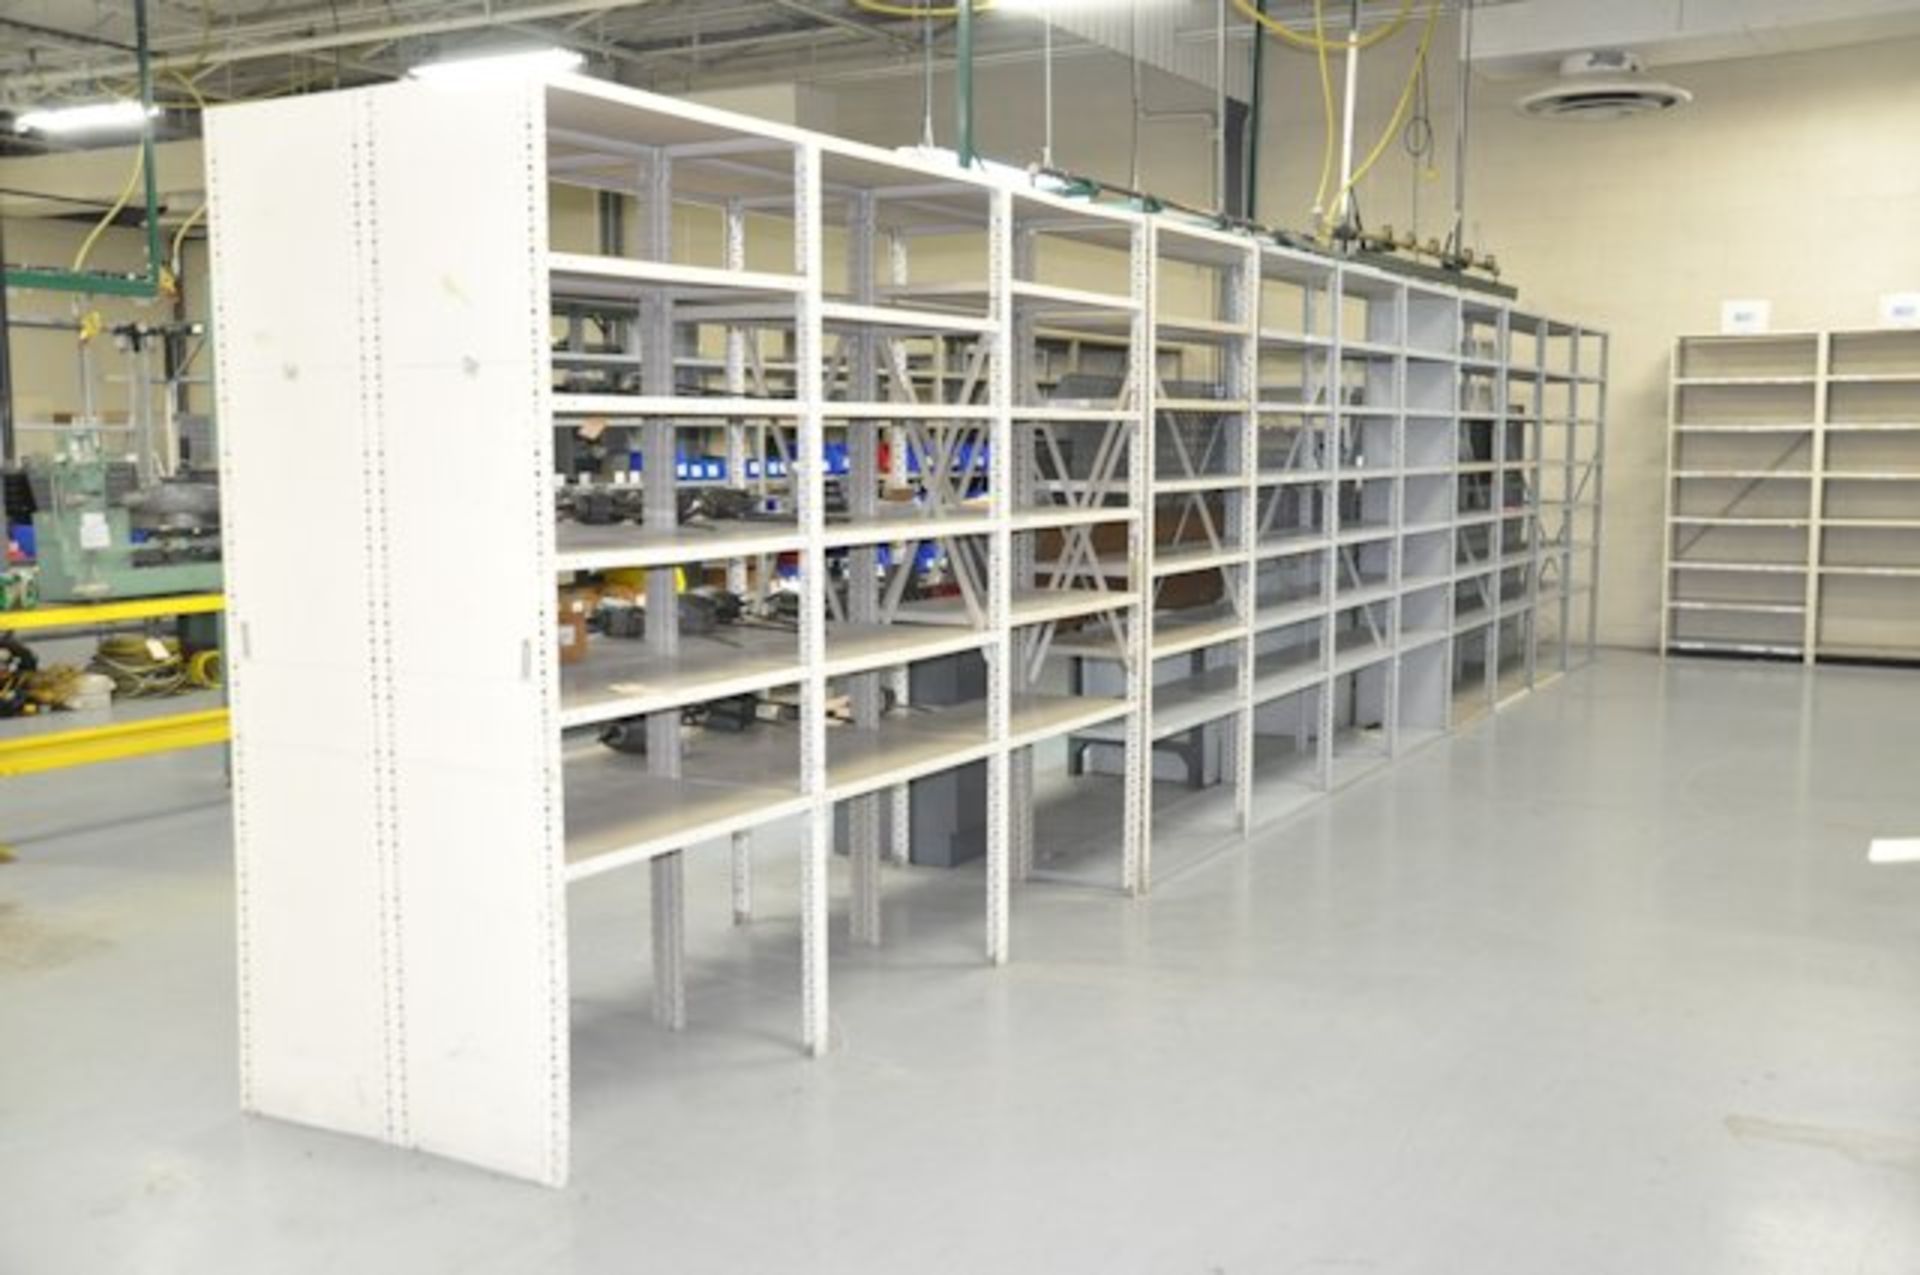 Lot-(14) Sections Shelving (Contents Not Included)